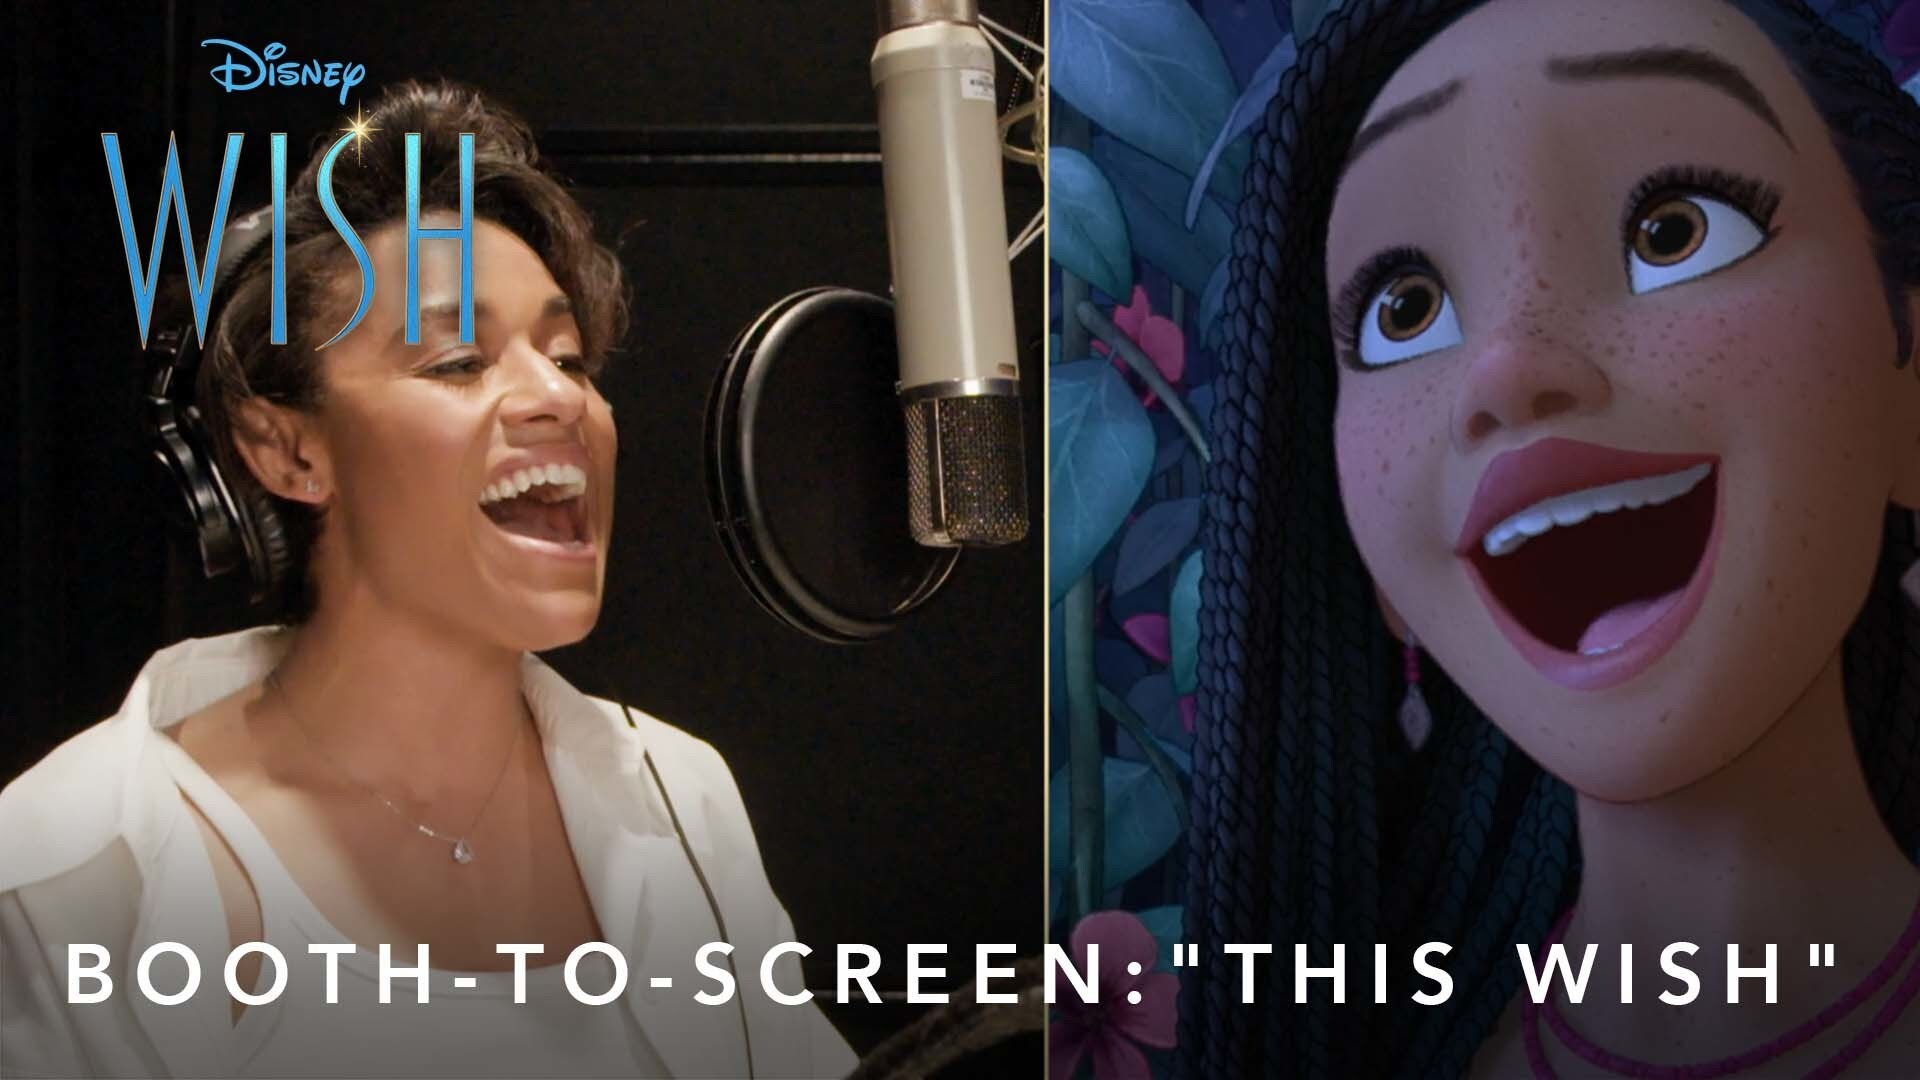 Disney's Wish | Booth to Screen - "This Wish"